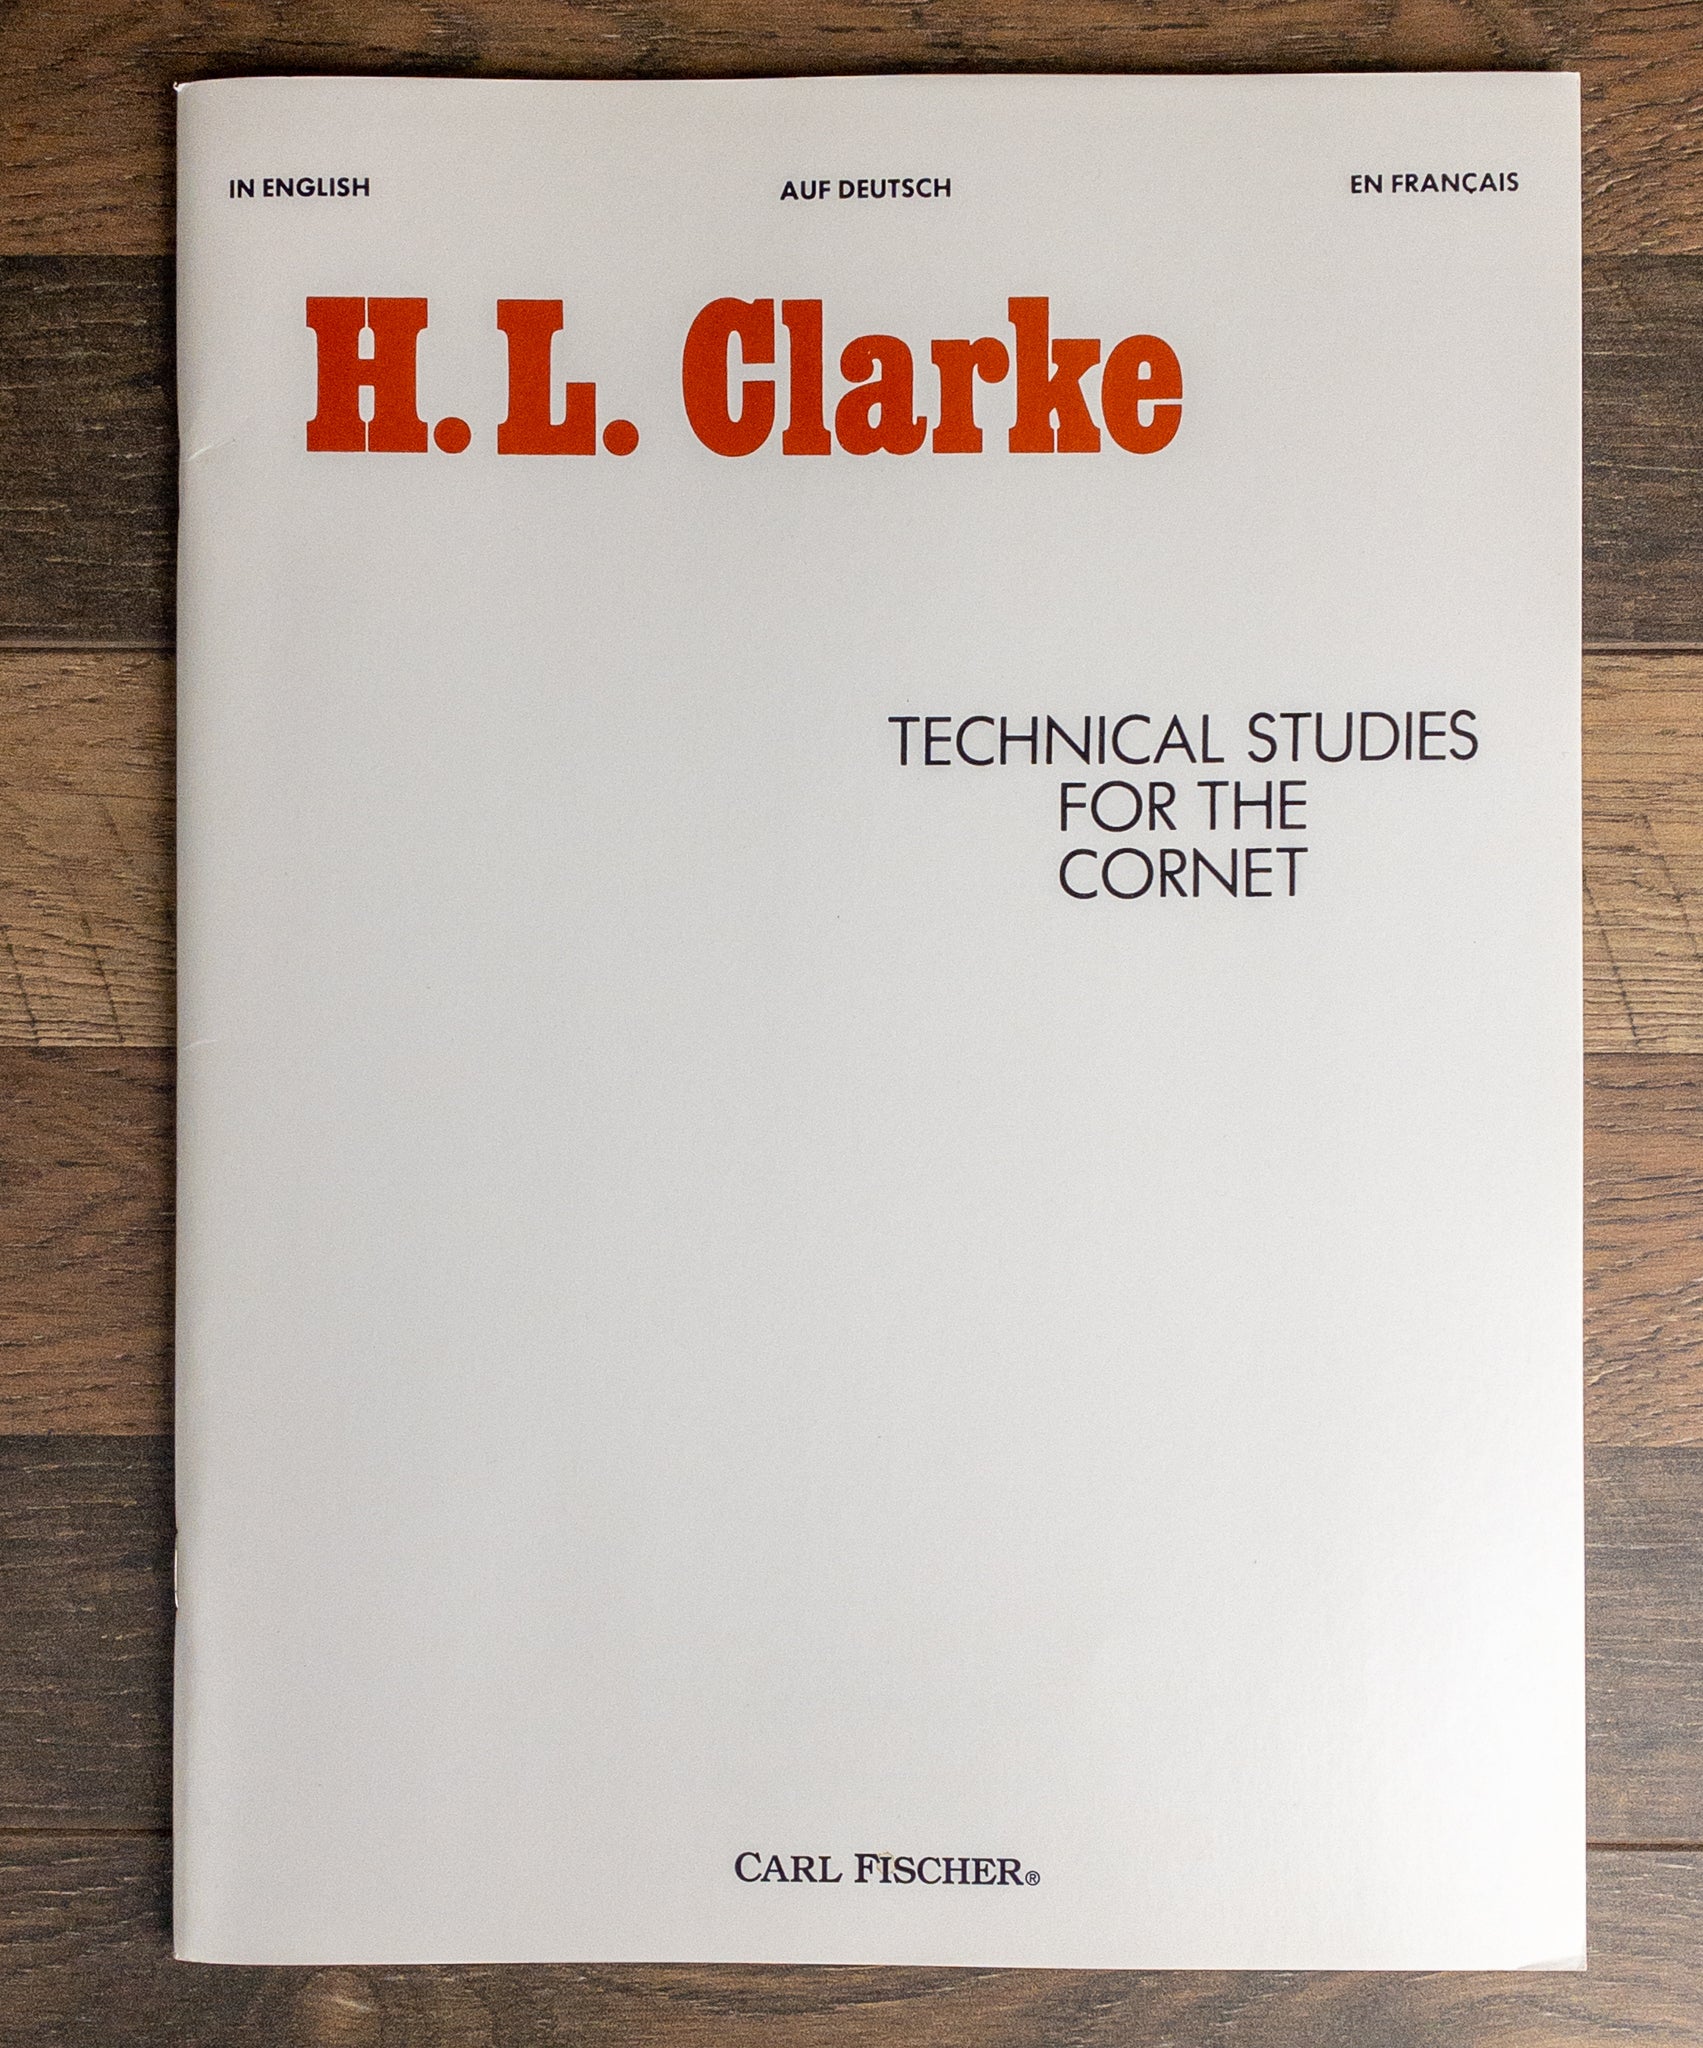 Technical Studies for the Cornet Book H.L. Clarke (English, German, French)